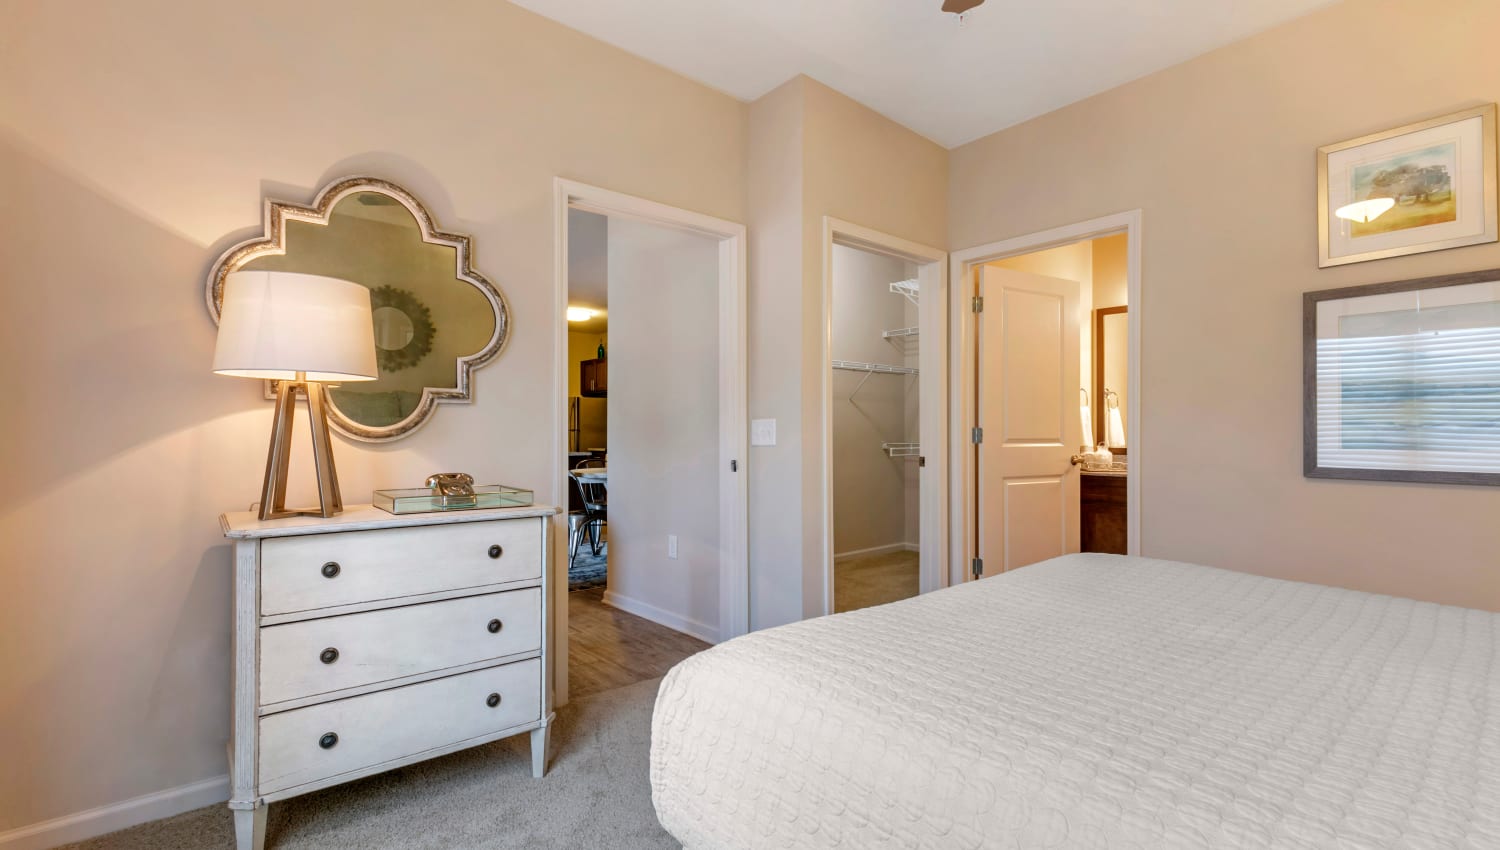 Model bedroom with ensuite bathroom and walk-in closet at The Village at Apison Pike in Ooltewah, Tennessee